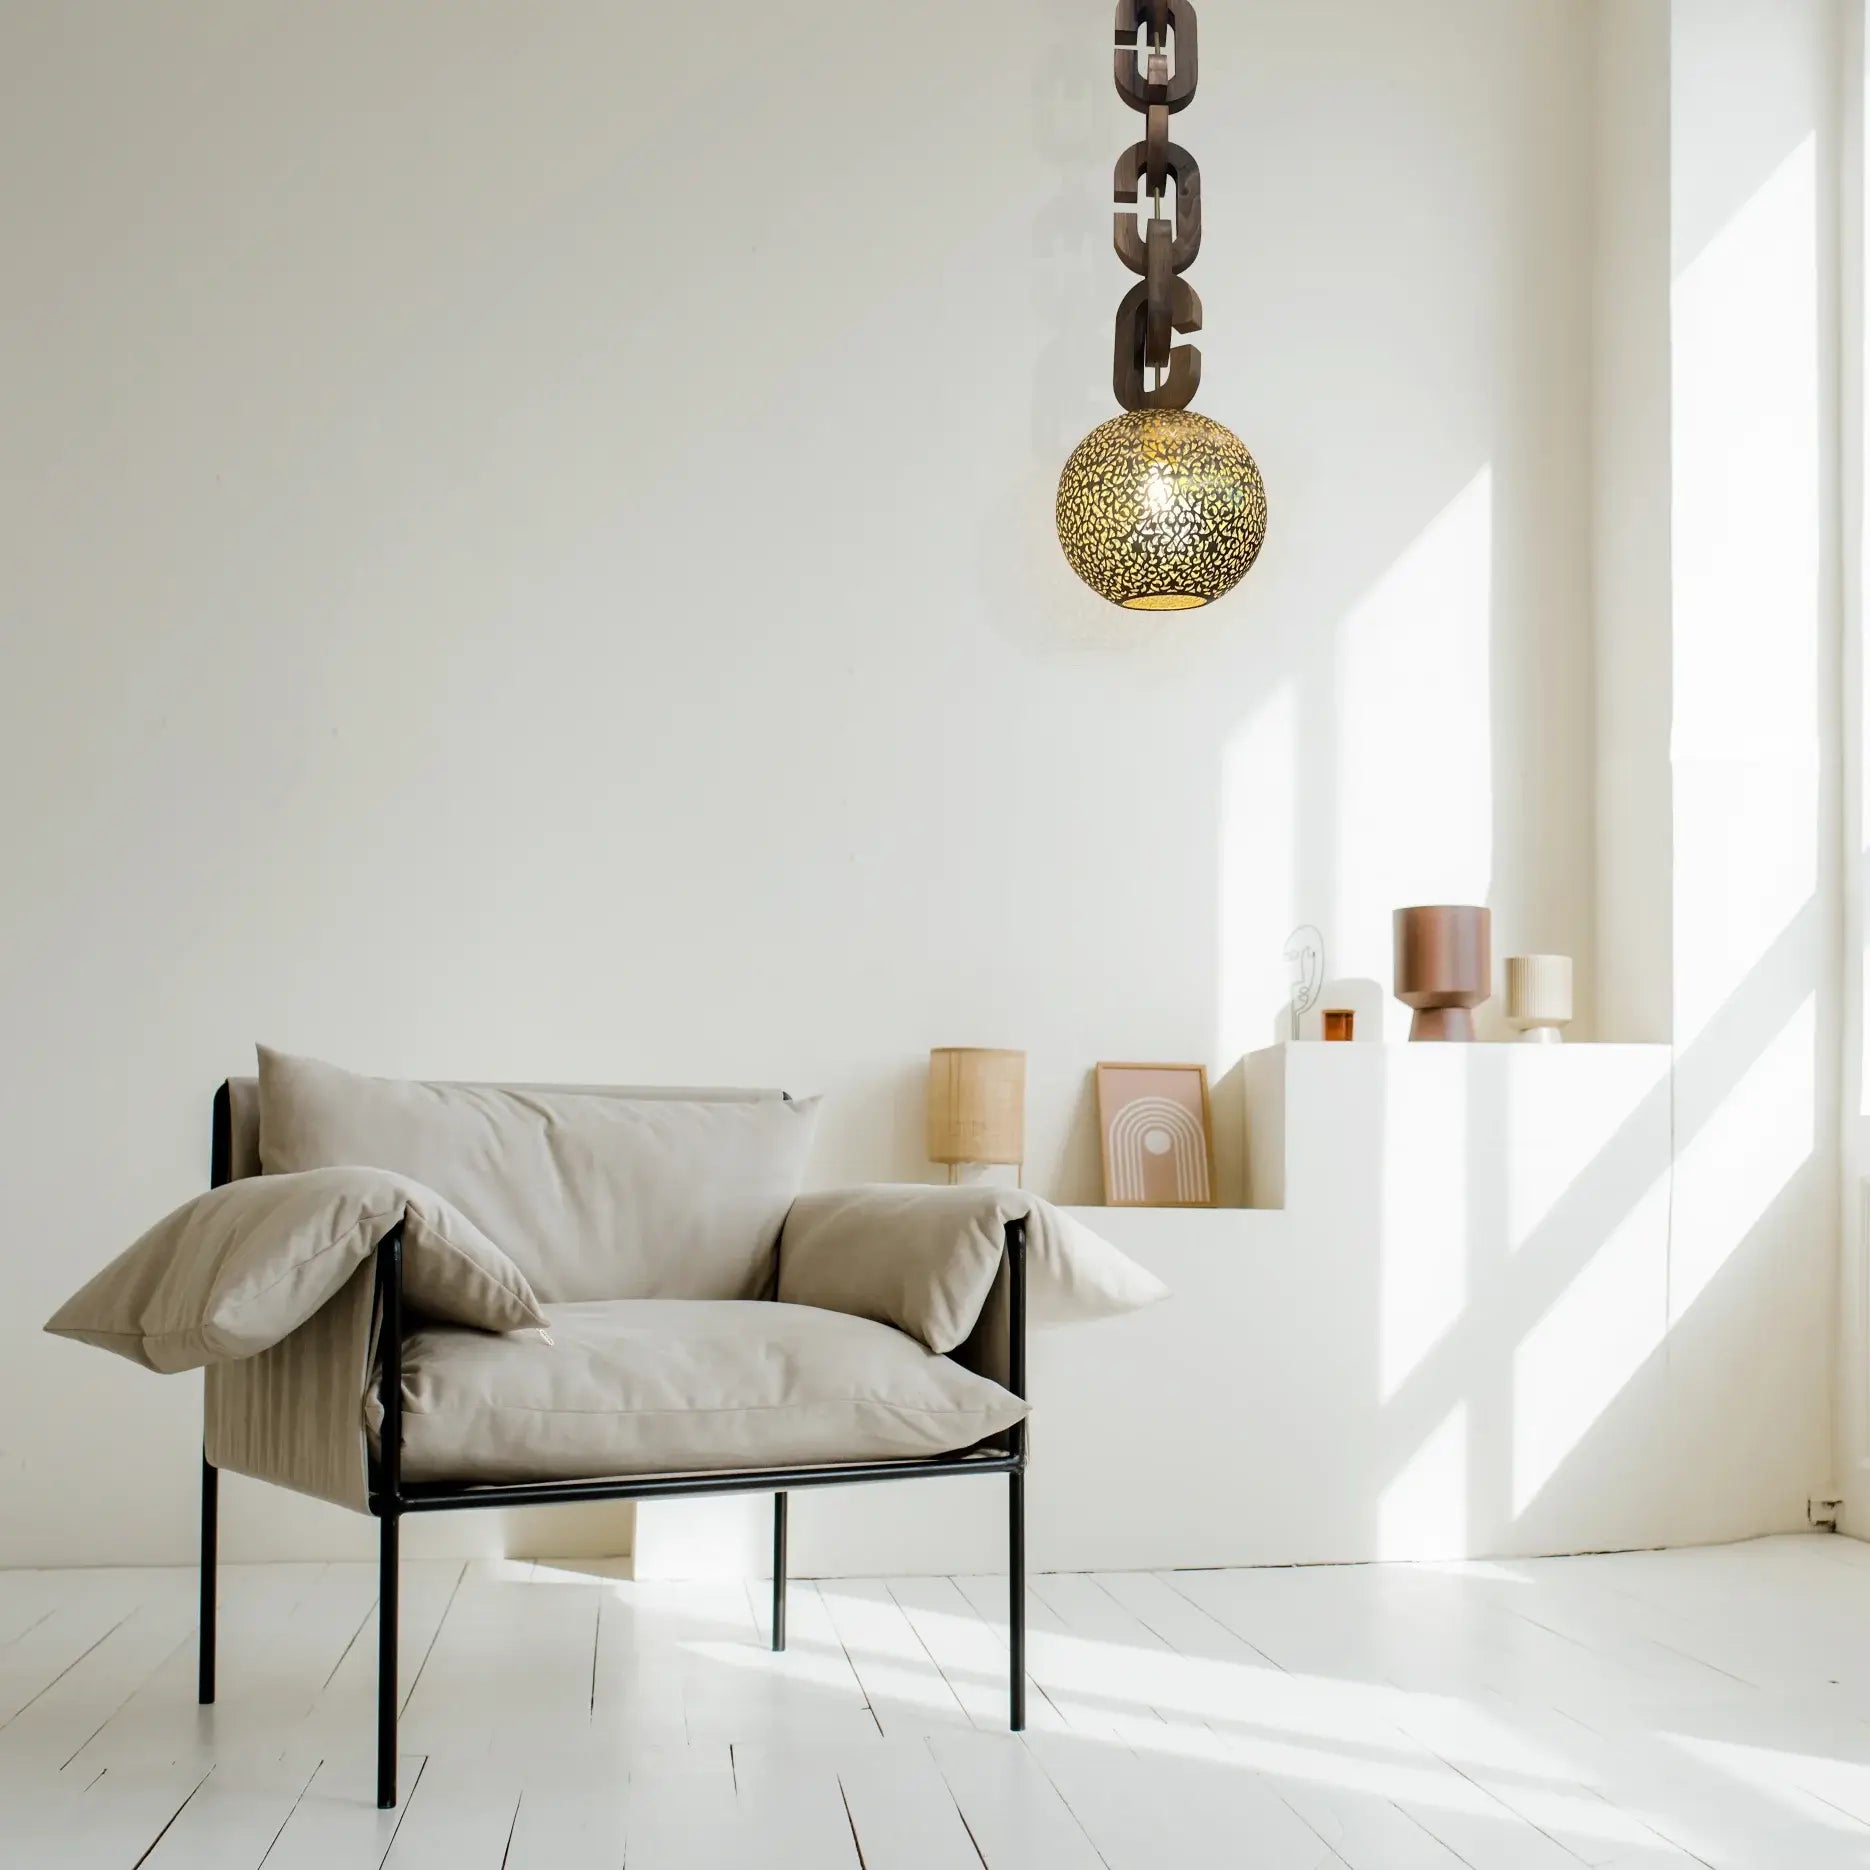 Dounia home Pendant light in polished brass made of Metal,  used as a living room lighting, Model: Riad chain